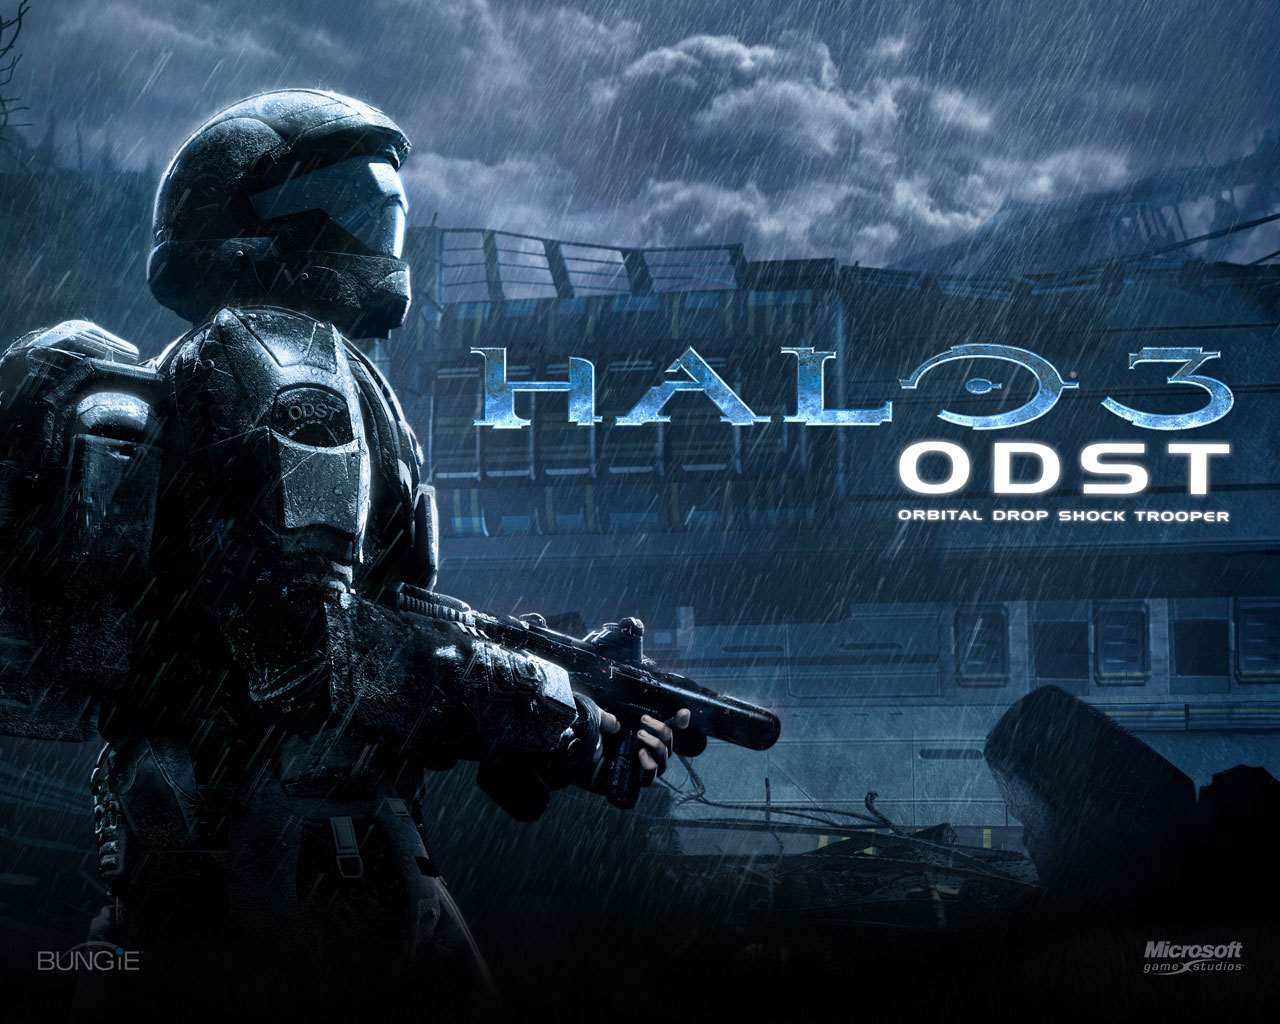 Official Halo - Halo 3 Odst Wallpaper Hd , HD Wallpaper & Backgrounds